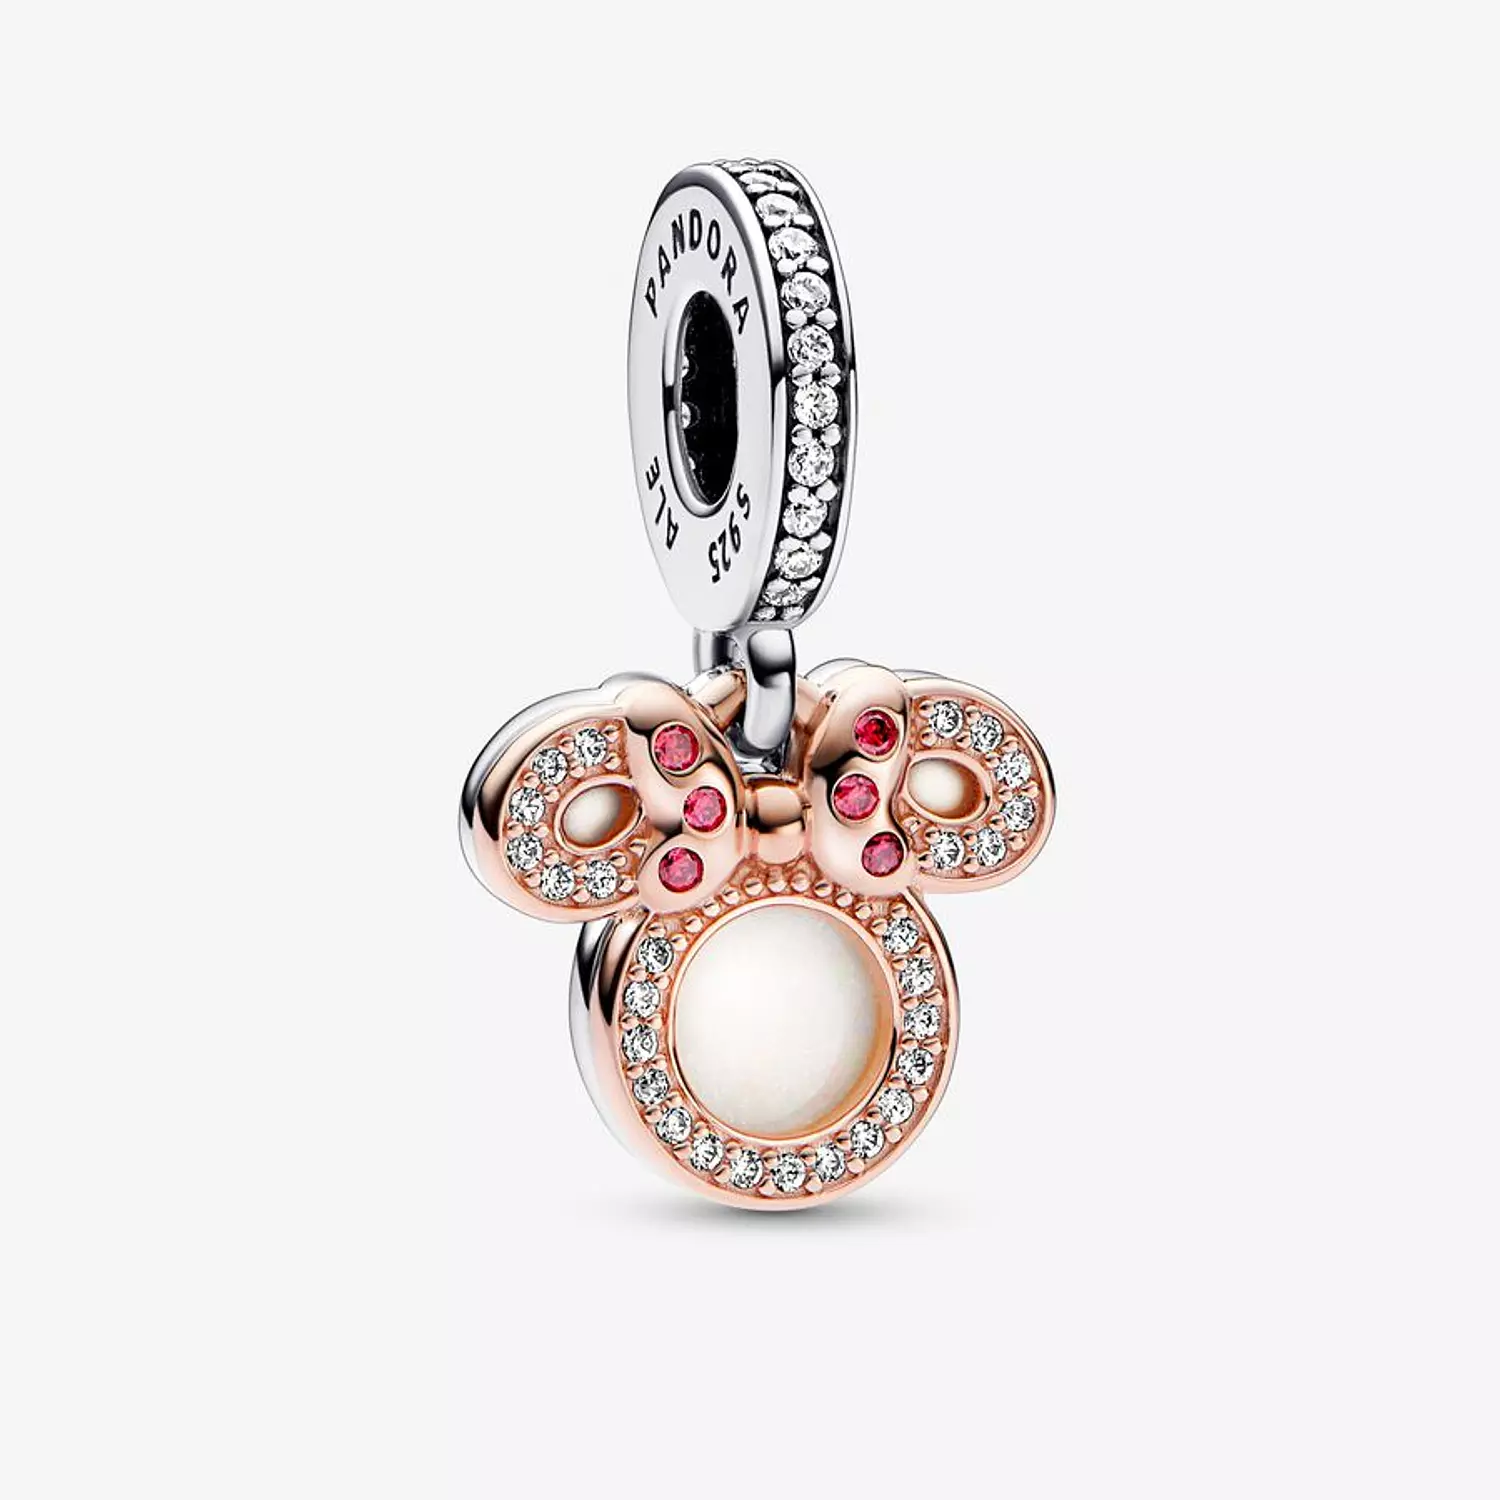 Sterling silver and 14k rose gold-plated unique metal blend-Charm-2023 C hover image